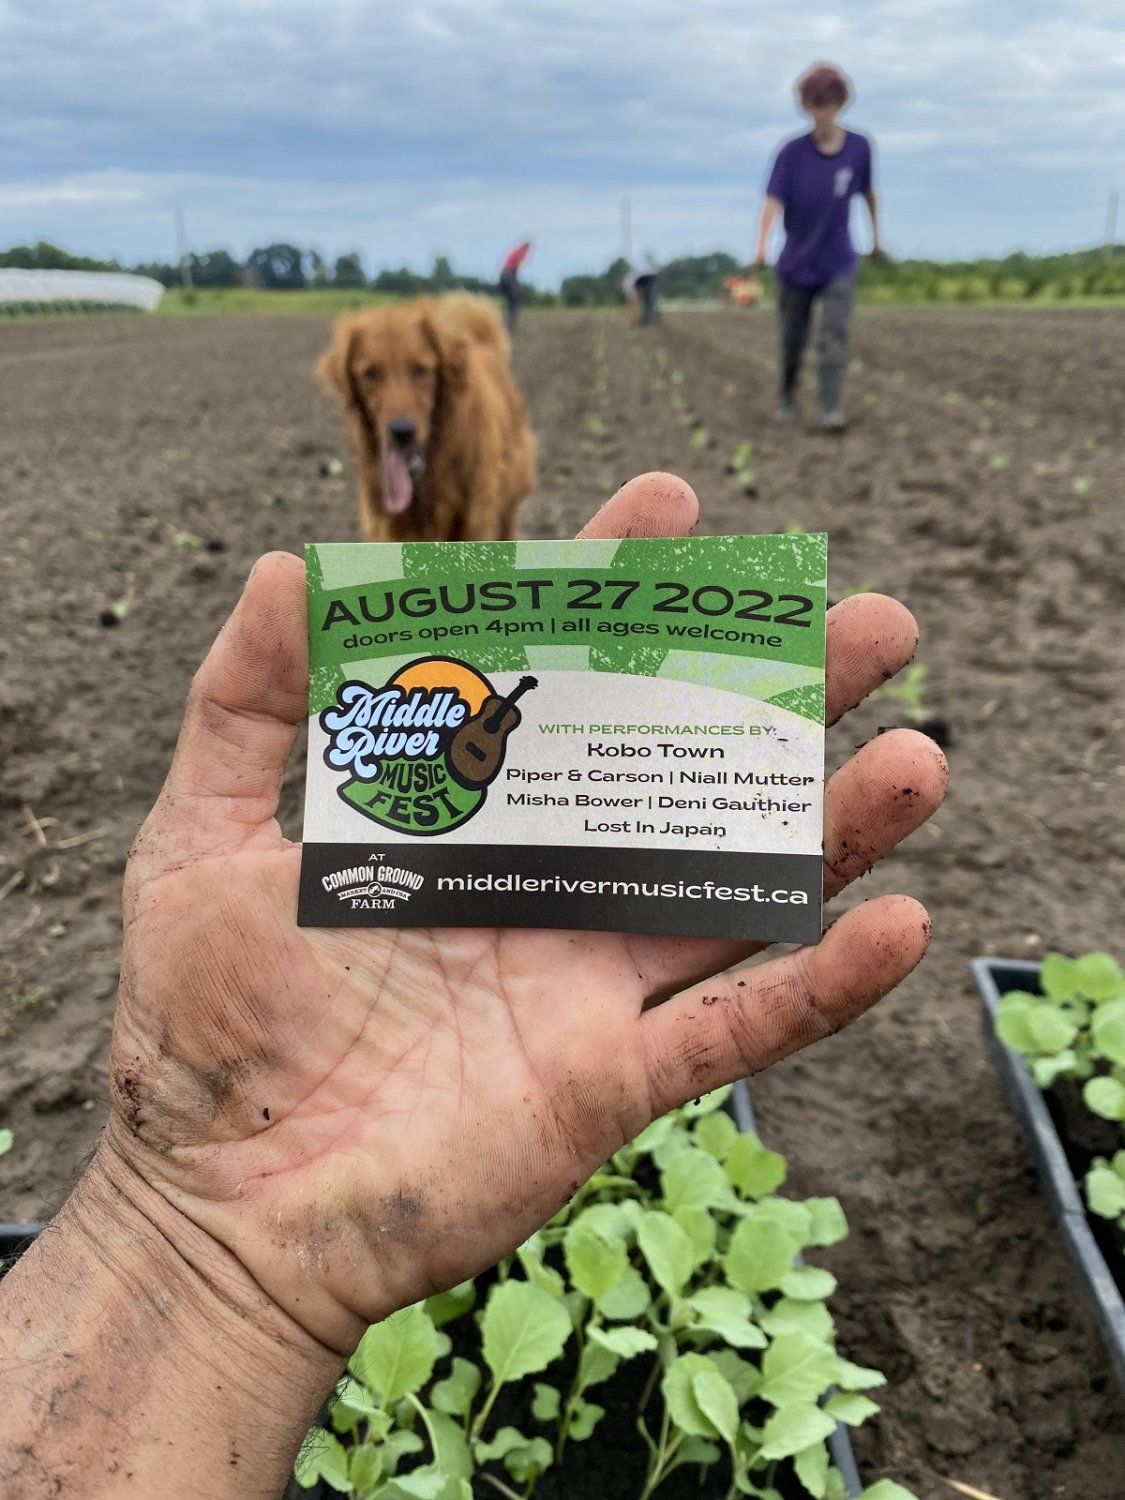 Next Happening: Farm Happenings for August 11, 2022